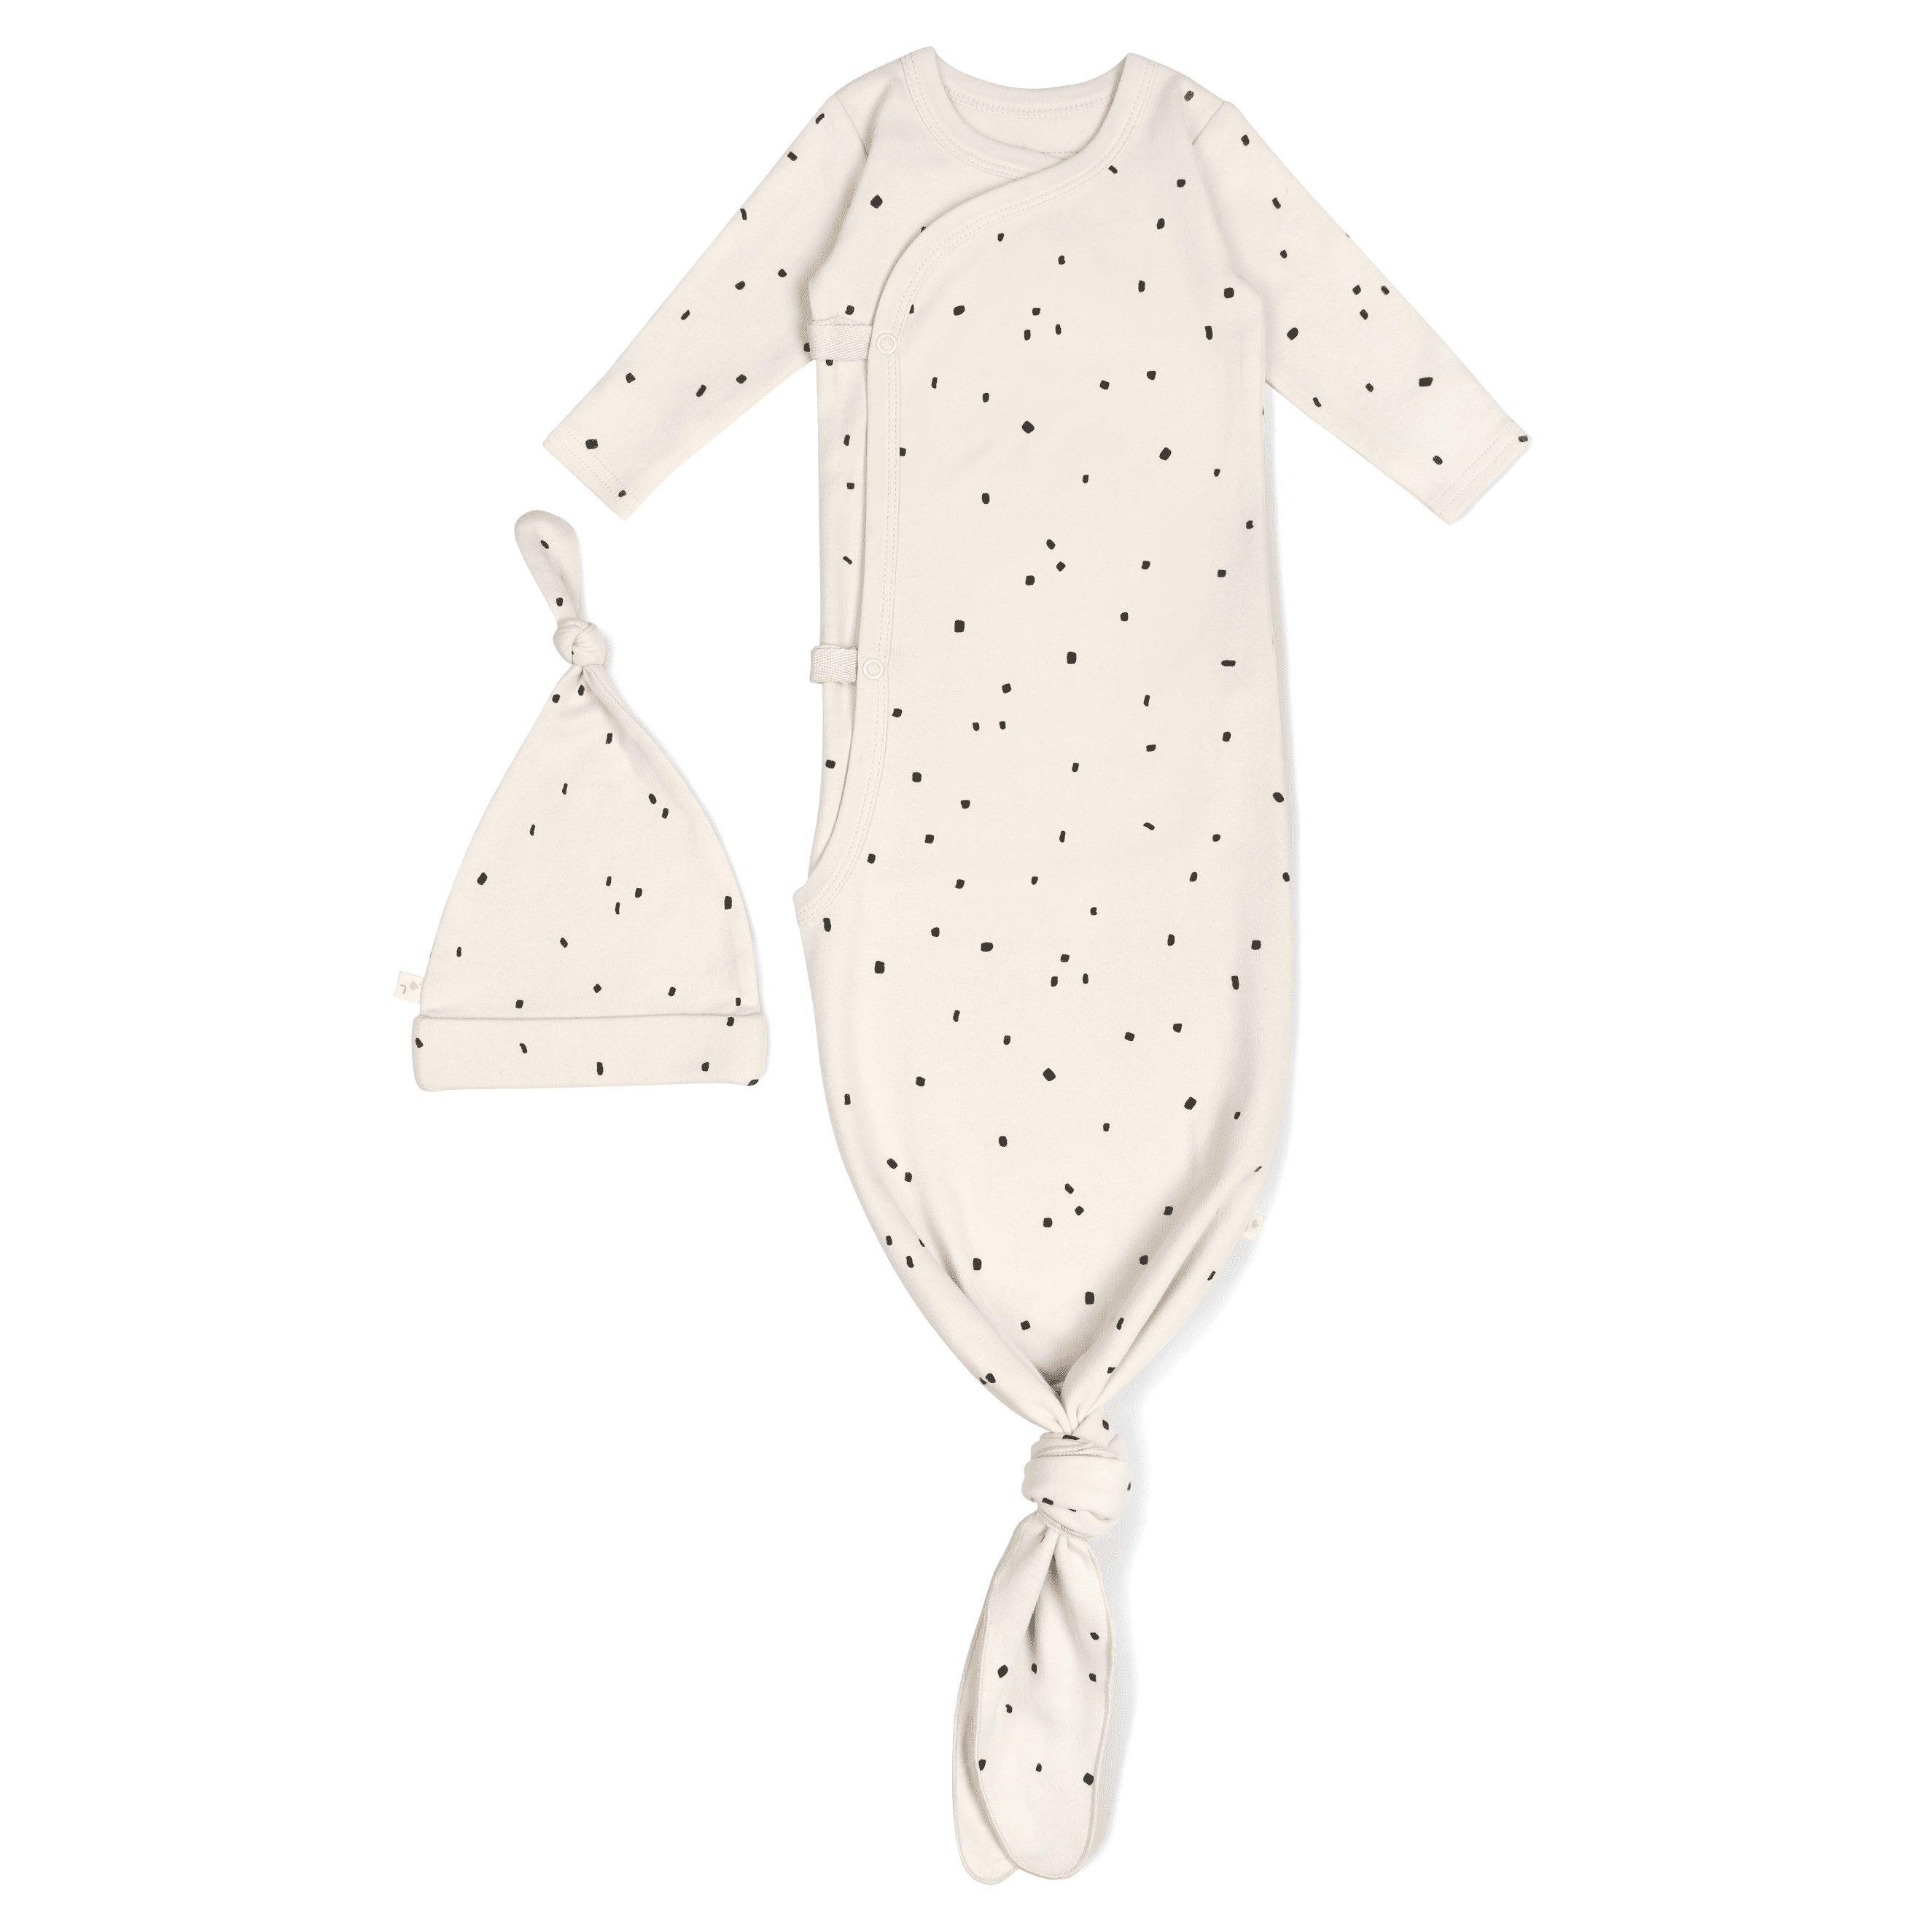 A cream-colored Organic Kimono Knotted Sleep Gown in Pixie Dots by Makemake Organics, featuring a knotted design at the bottom, paired with a matching hat, all isolated on a white background.